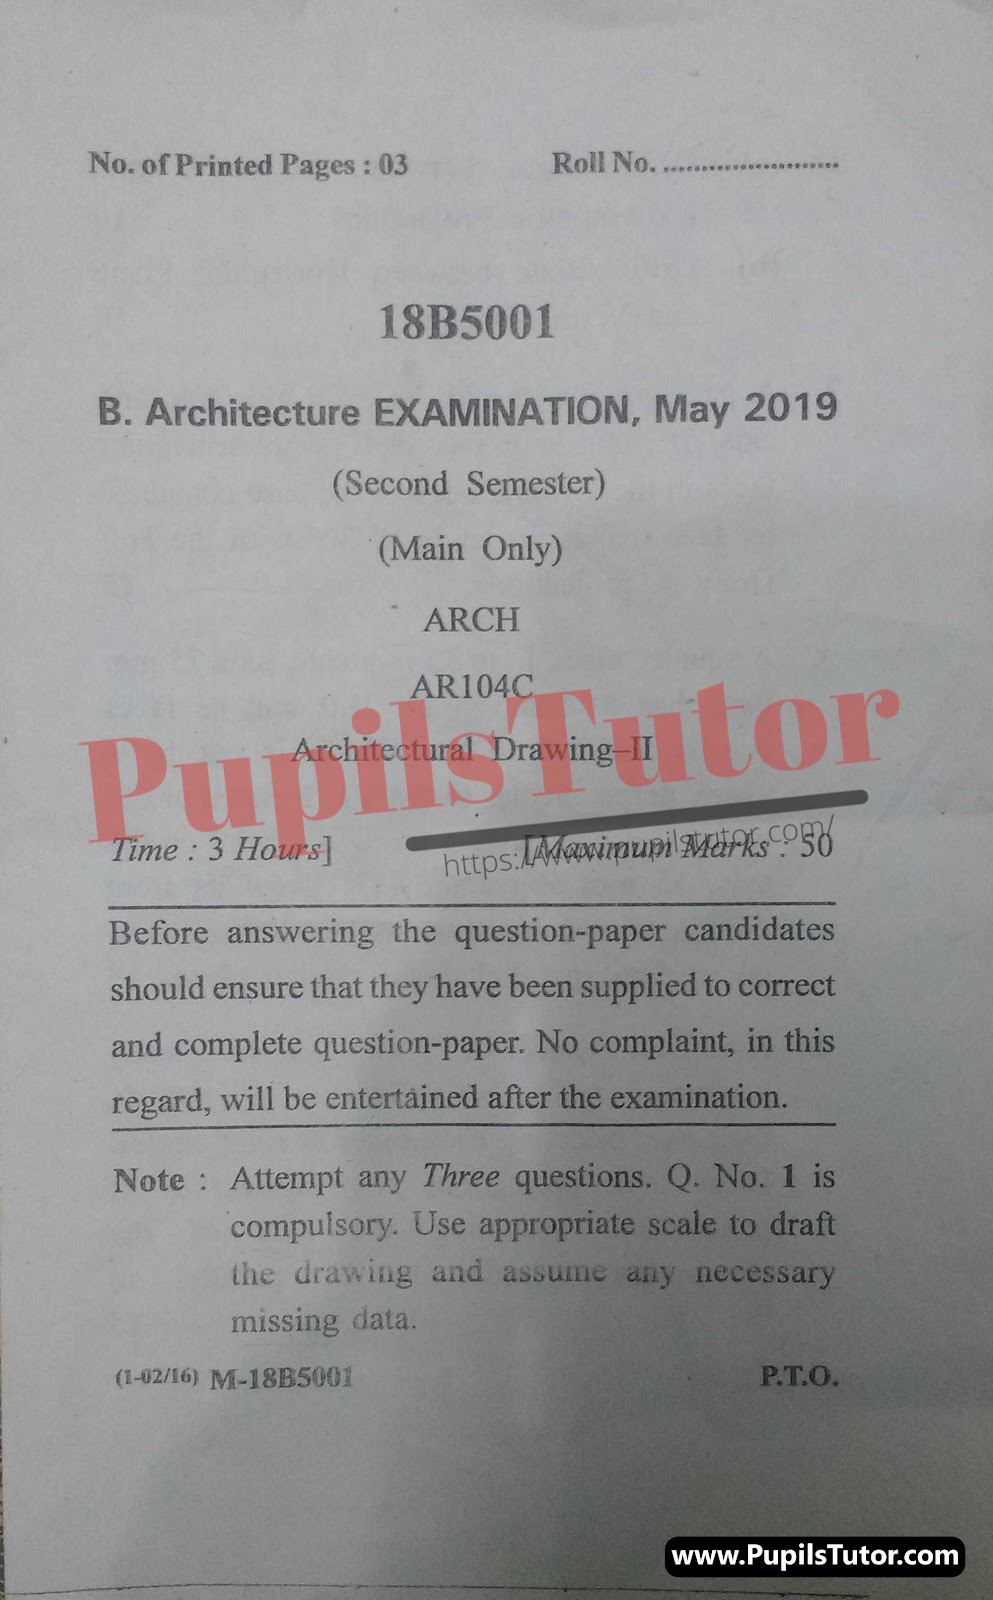 DCRUST (Deenbandhu Chhotu Ram University of Science and Technology, Murthal Haryana) barch Semester Exam Second Semester Previous Year Architectural Drawing Question Paper For May, 2019 Exam (Question Paper Page 1) - pupilstutor.com